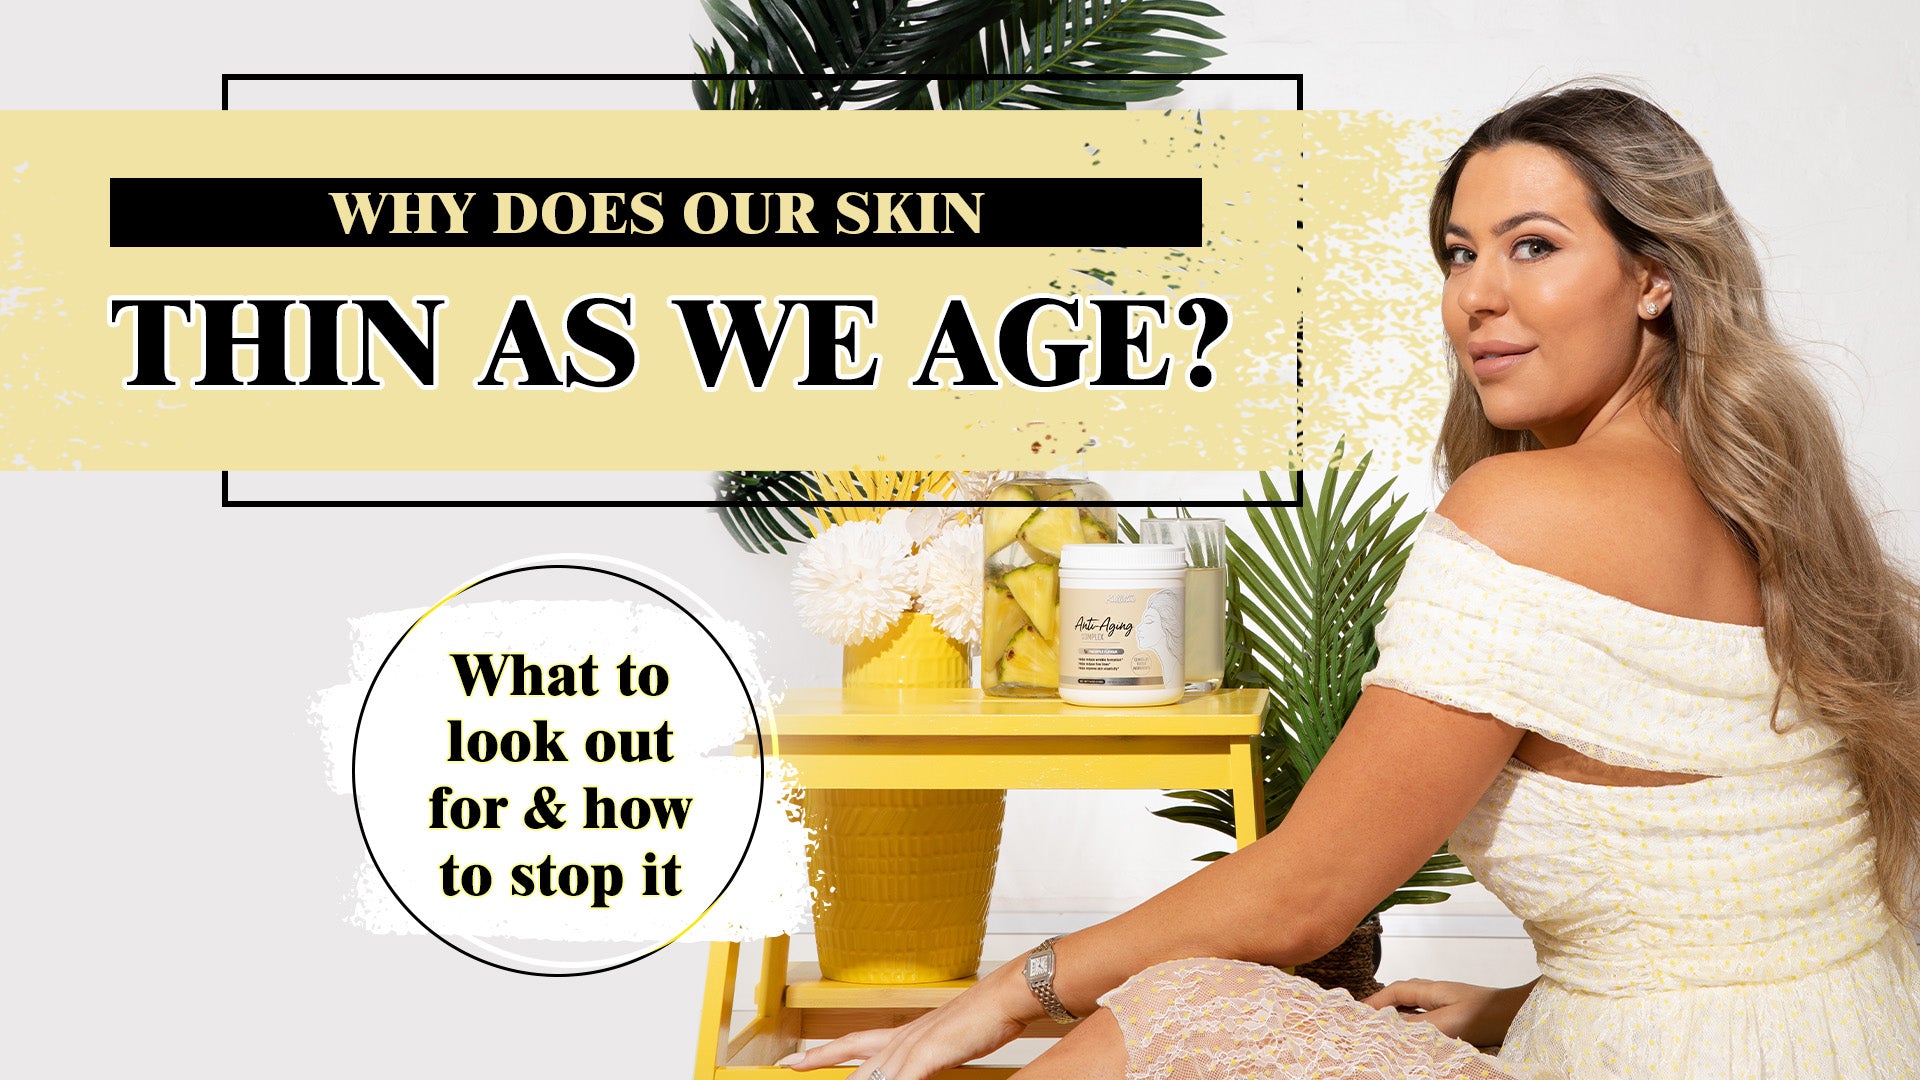 Why does our skin thin as we age?